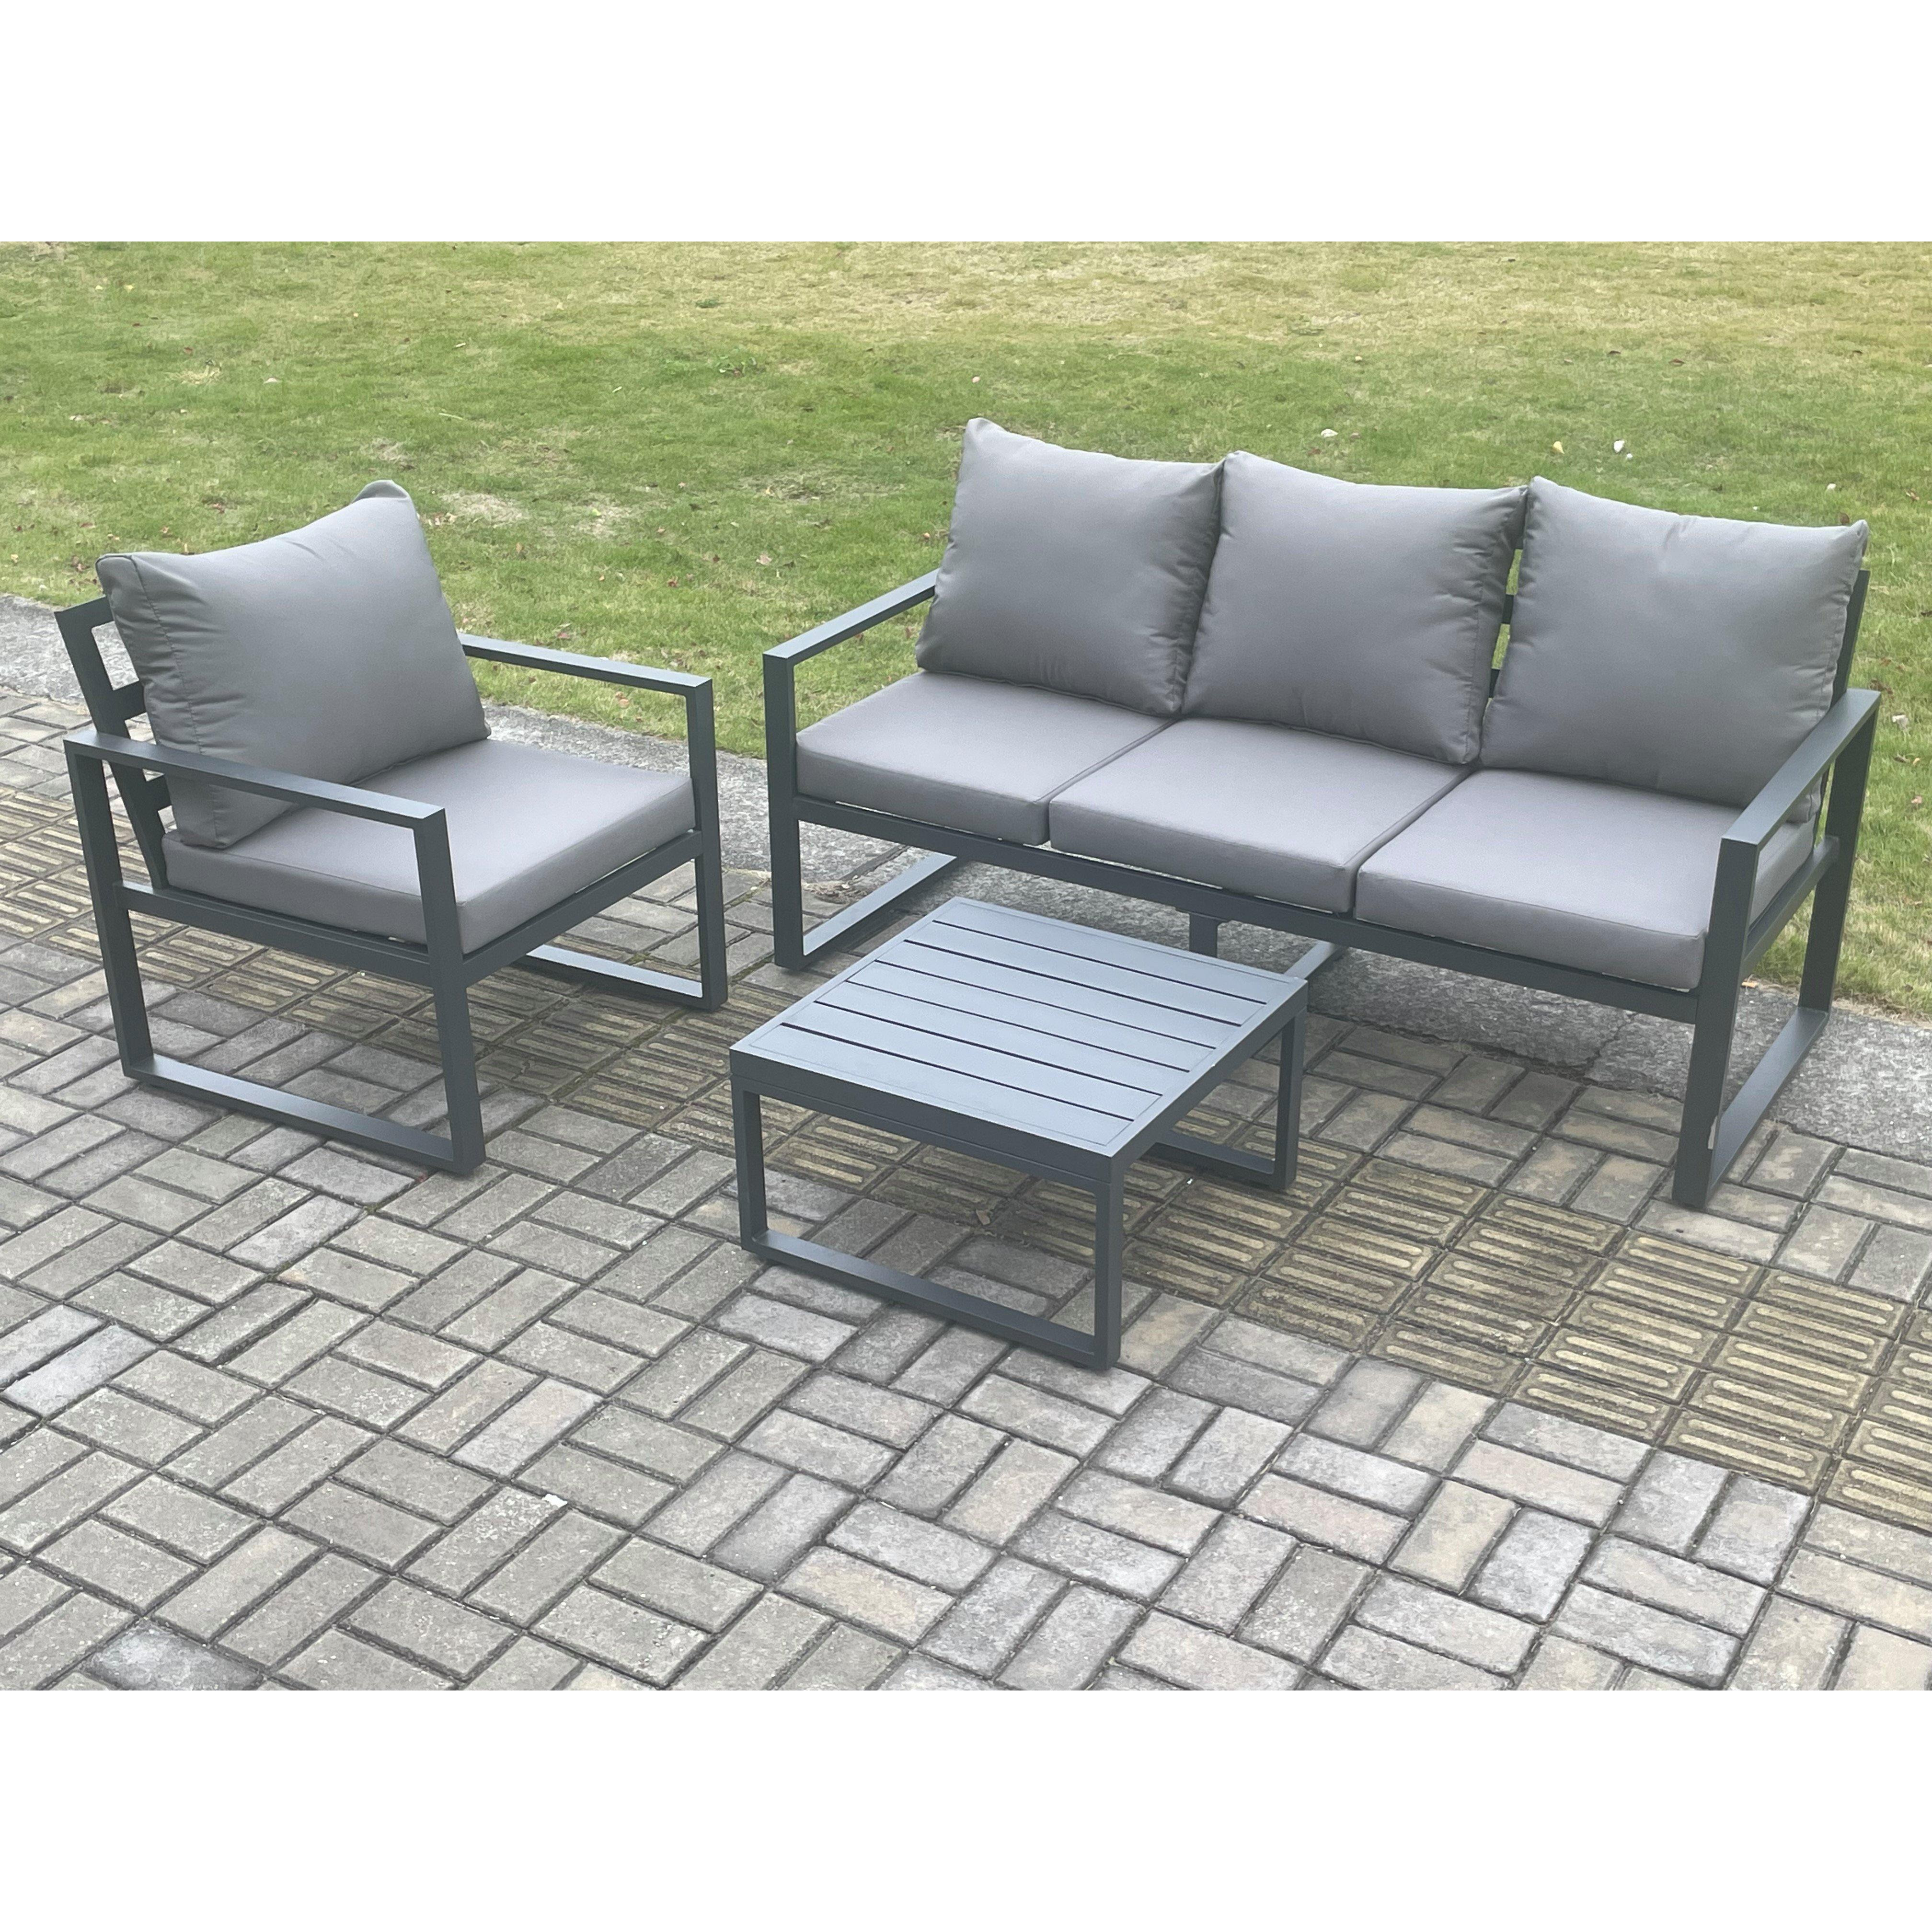 Aluminium Outdoor Garden Furniture Set Lounge Sofa Chairs Square Coffee Table Sets Conservatory Set Dark Grey - image 1